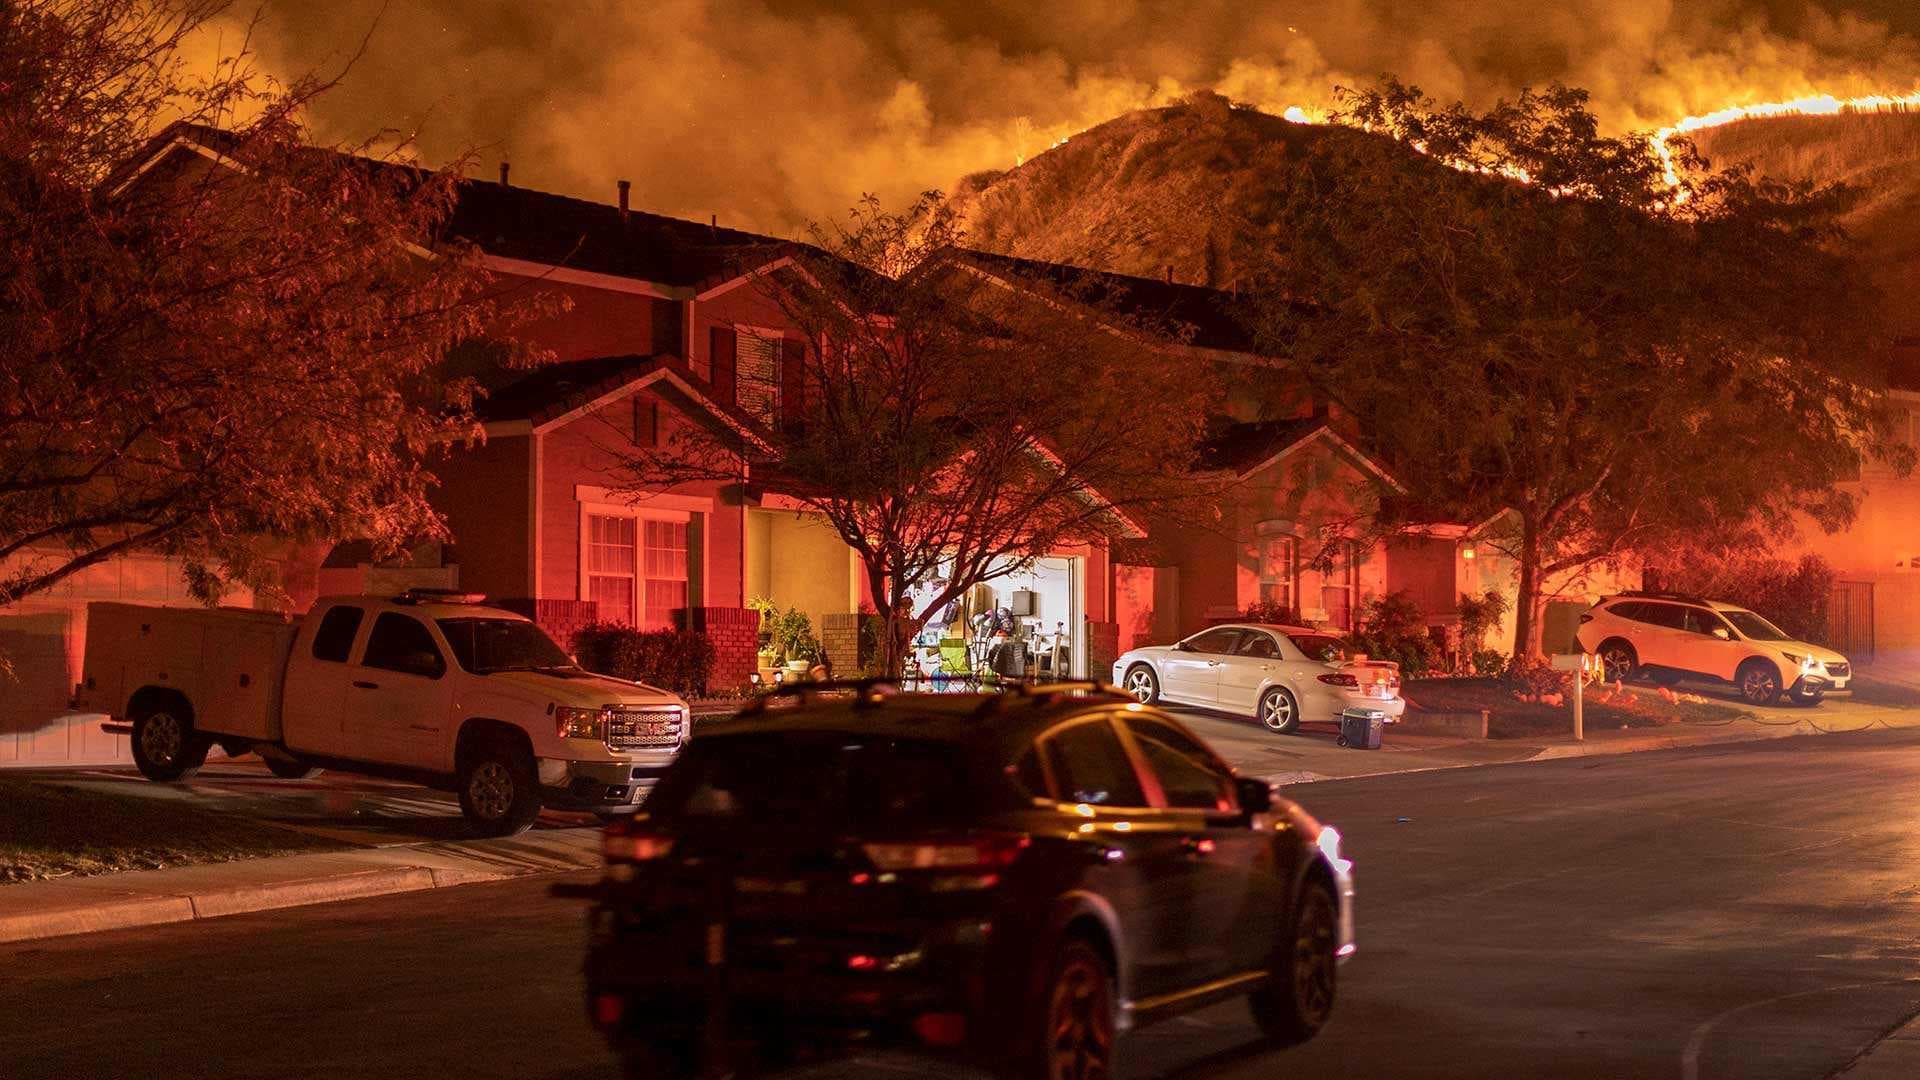 Flames menace a Chino, Calif., neighborhood during the Blue Ridge Fire in October 2020. A new NIH grant will fund a groundbreaking UMD study of the effect of wildfires on infant health in the United States.